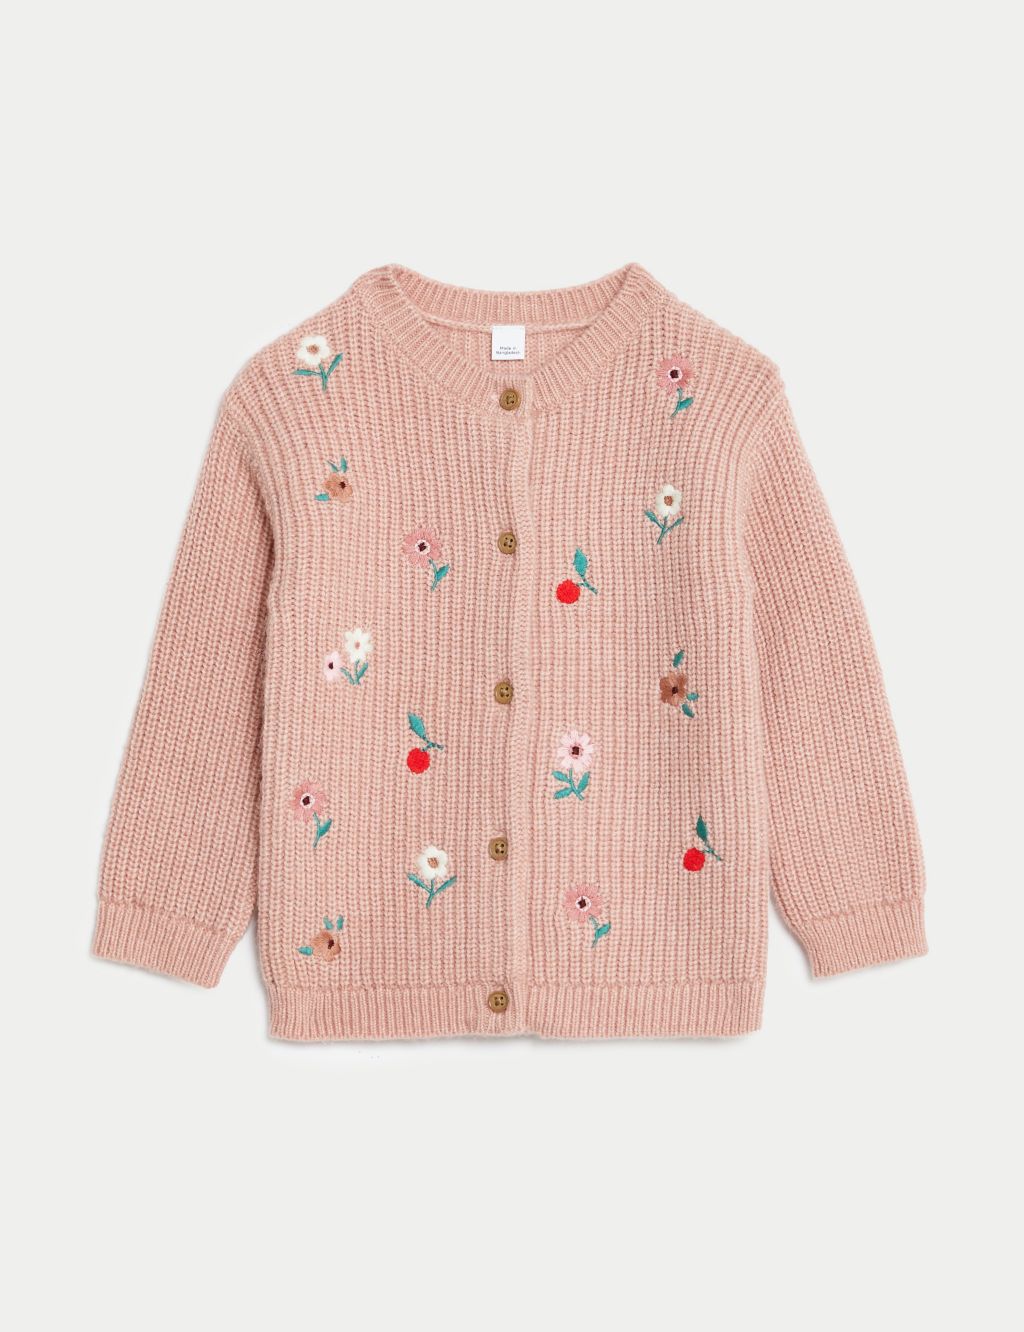 Floral Embroidered Knitted Cardigan (0-3 Yrs) image 1